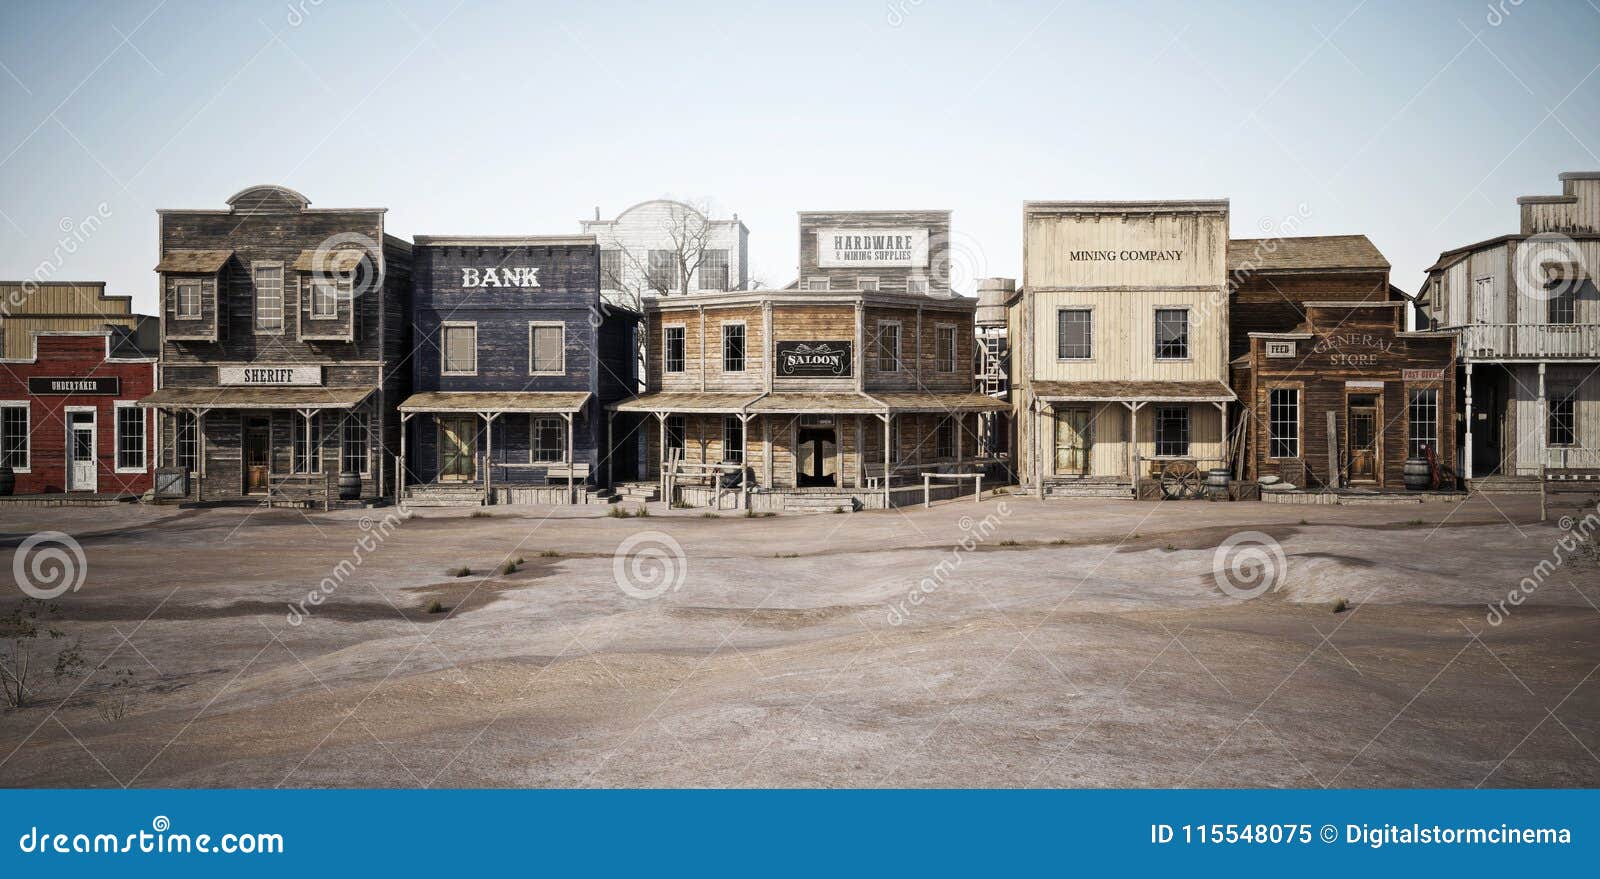 wide side view of a rustic antique western town with various businesses.